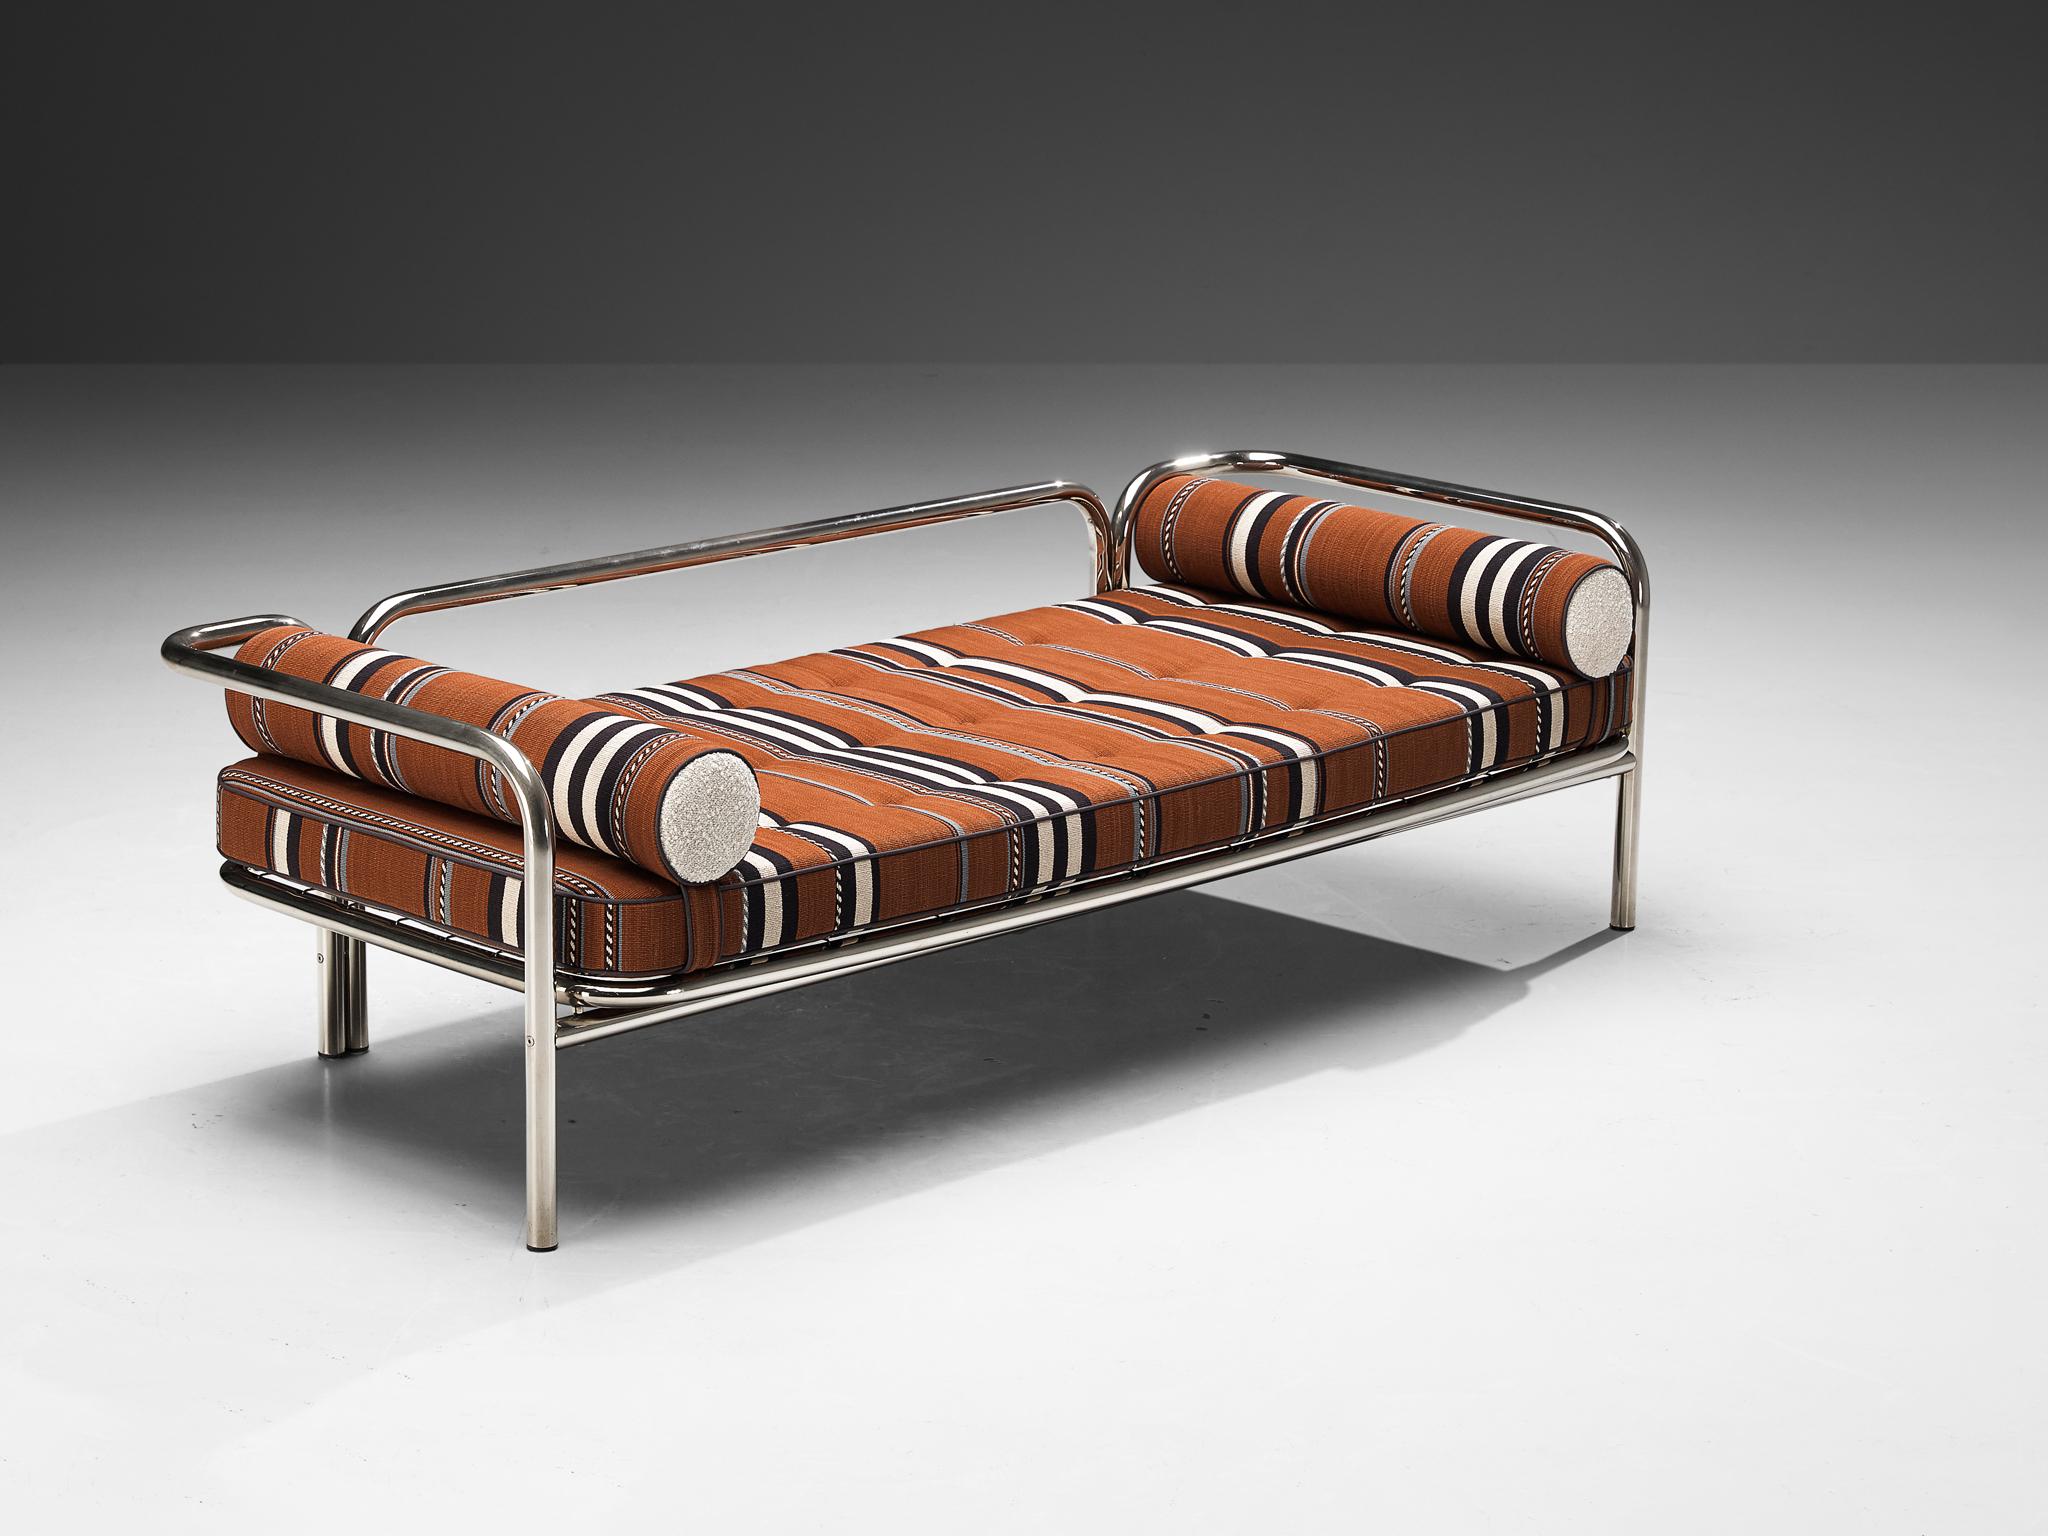 Gae Aulenti for Poltronova Production, daybed model 'Locus Solus', chrome-plated steel, Larsen fabric, Italy, 1964 

This daybed by Gae Aulenti is part of the 'Locus Solus' series created in 1964. The bed is based on a constructive frame that left